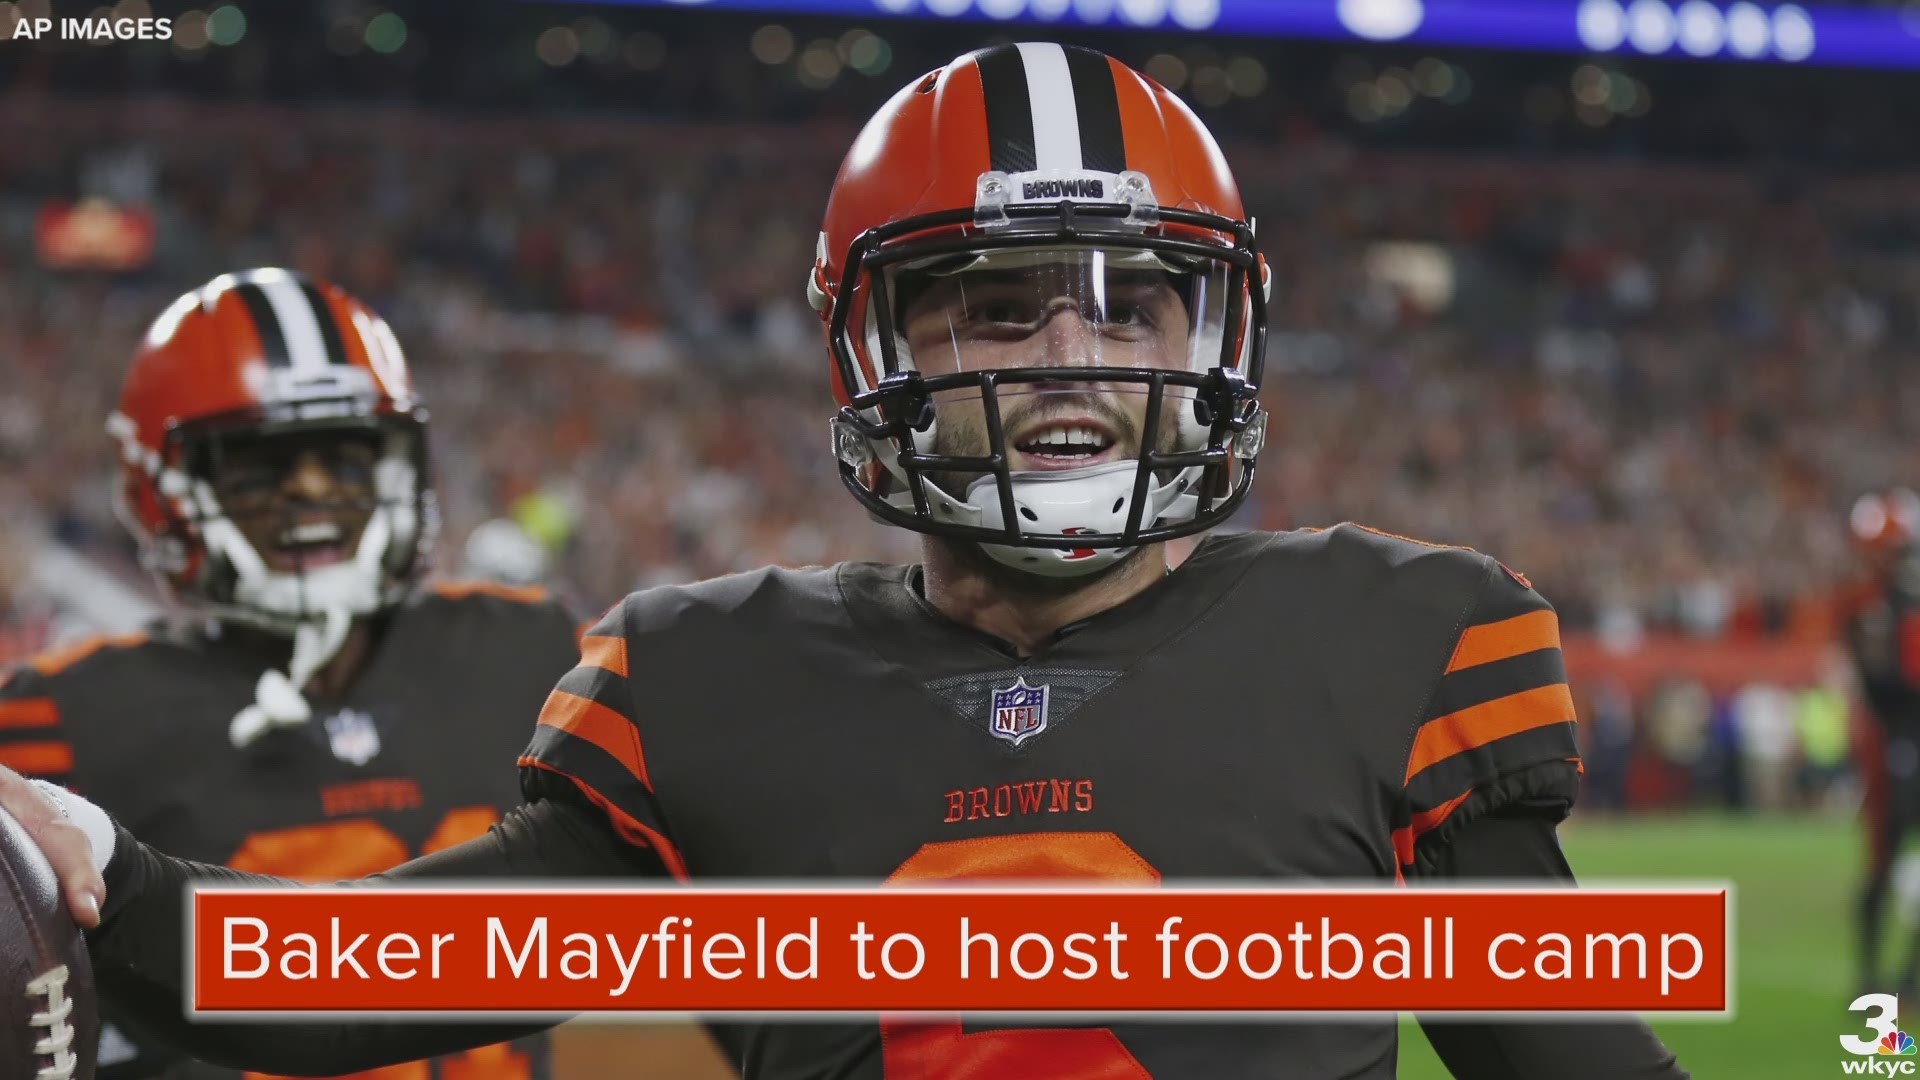 Cleveland Browns quarterback Baker Mayfield will host the inaugural Baker Mayfield Youth Football ProCamp next month.